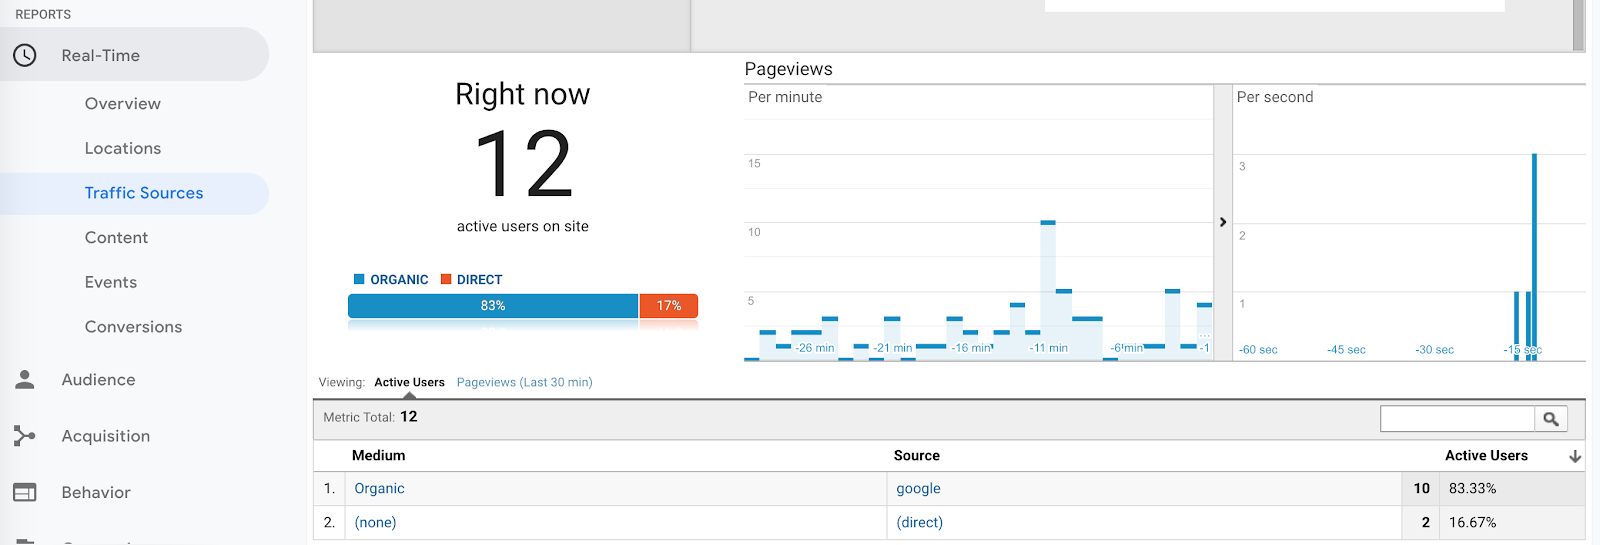 screen grab of Google Analytics Real Time Reports